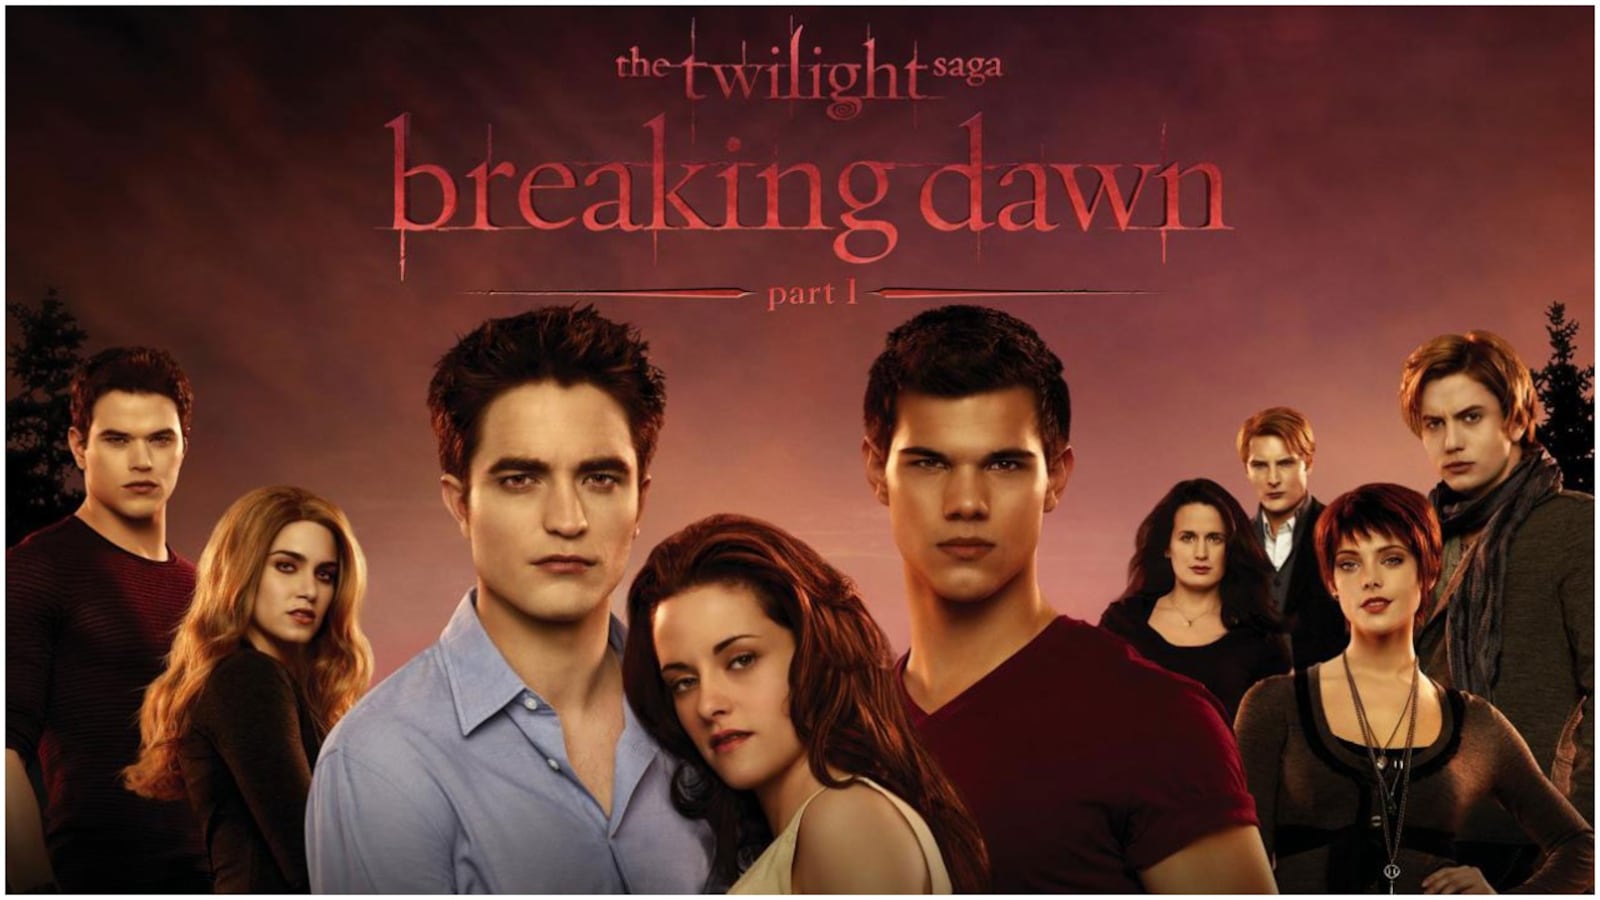 Twilight movies are about to leave Netflix. Catch the saga before January 16